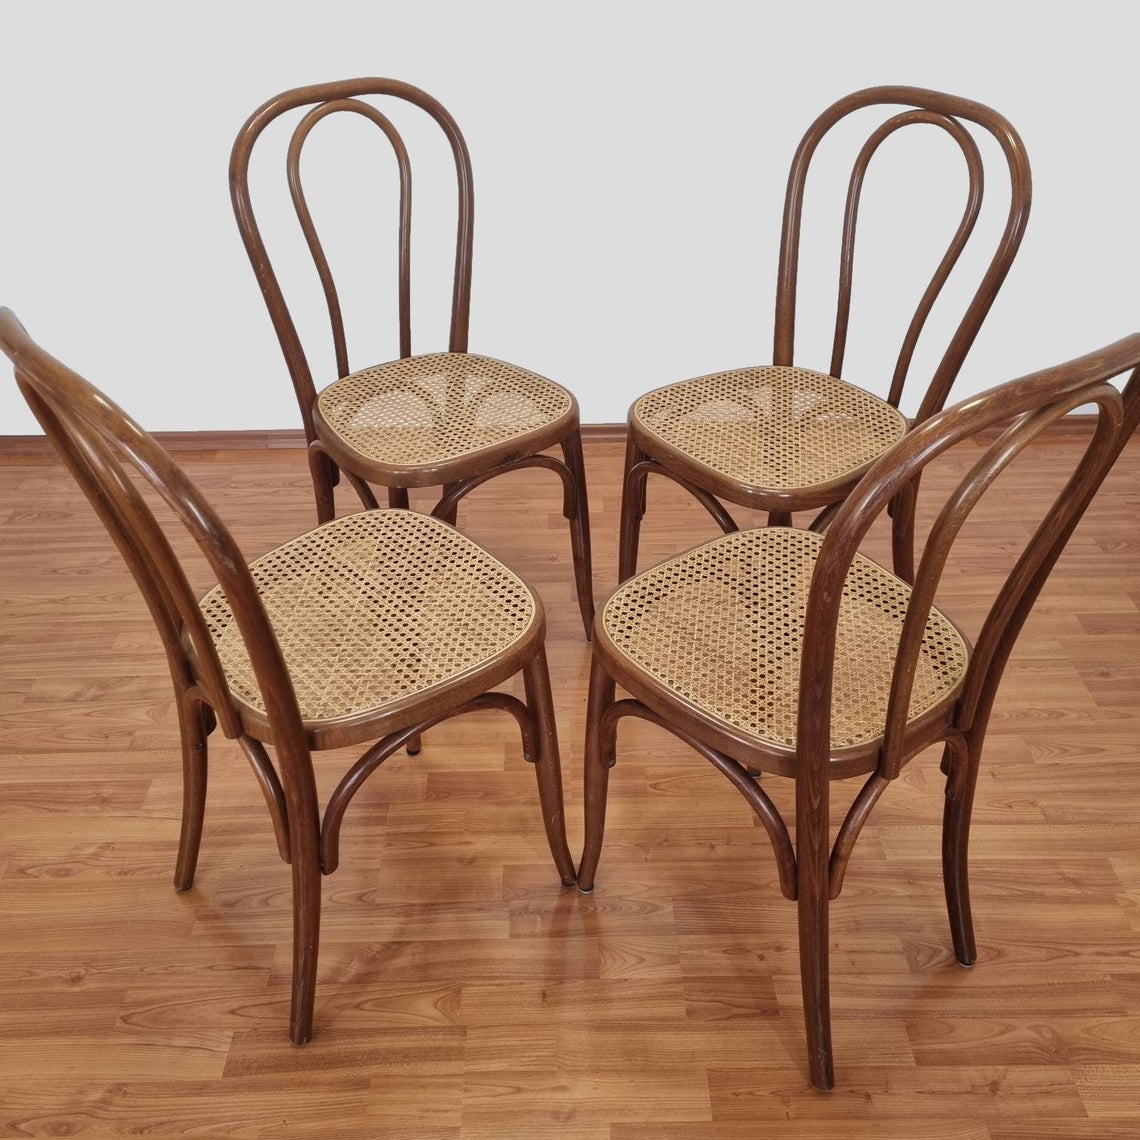 Set Of 4 Thonet Style Dining Chairs, Thonet n14 Chairs, Cane Dining Chairs, 80s